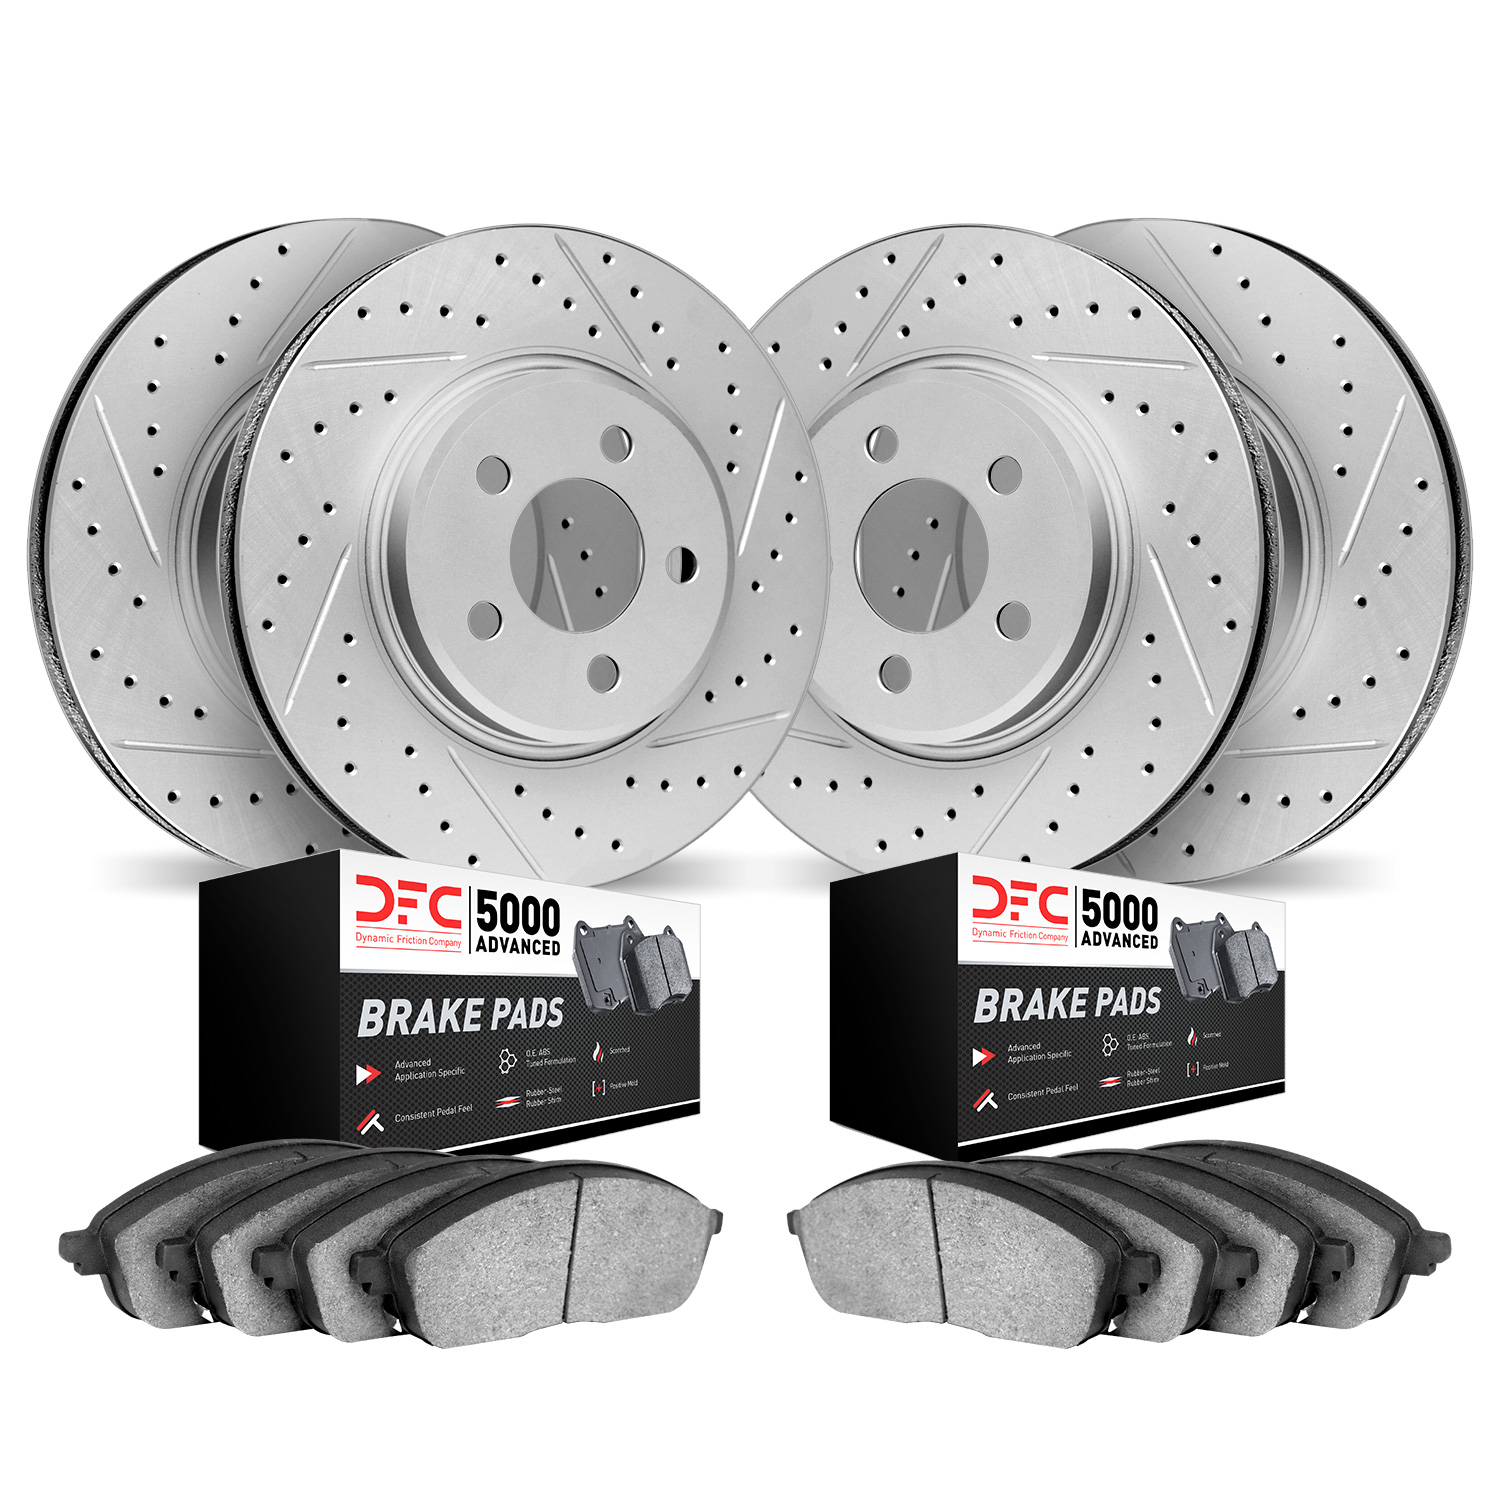 2504-31067 Geoperformance Drilled/Slotted Rotors w/5000 Advanced Brake Pads Kit, Fits Select BMW, Position: Front and Rear